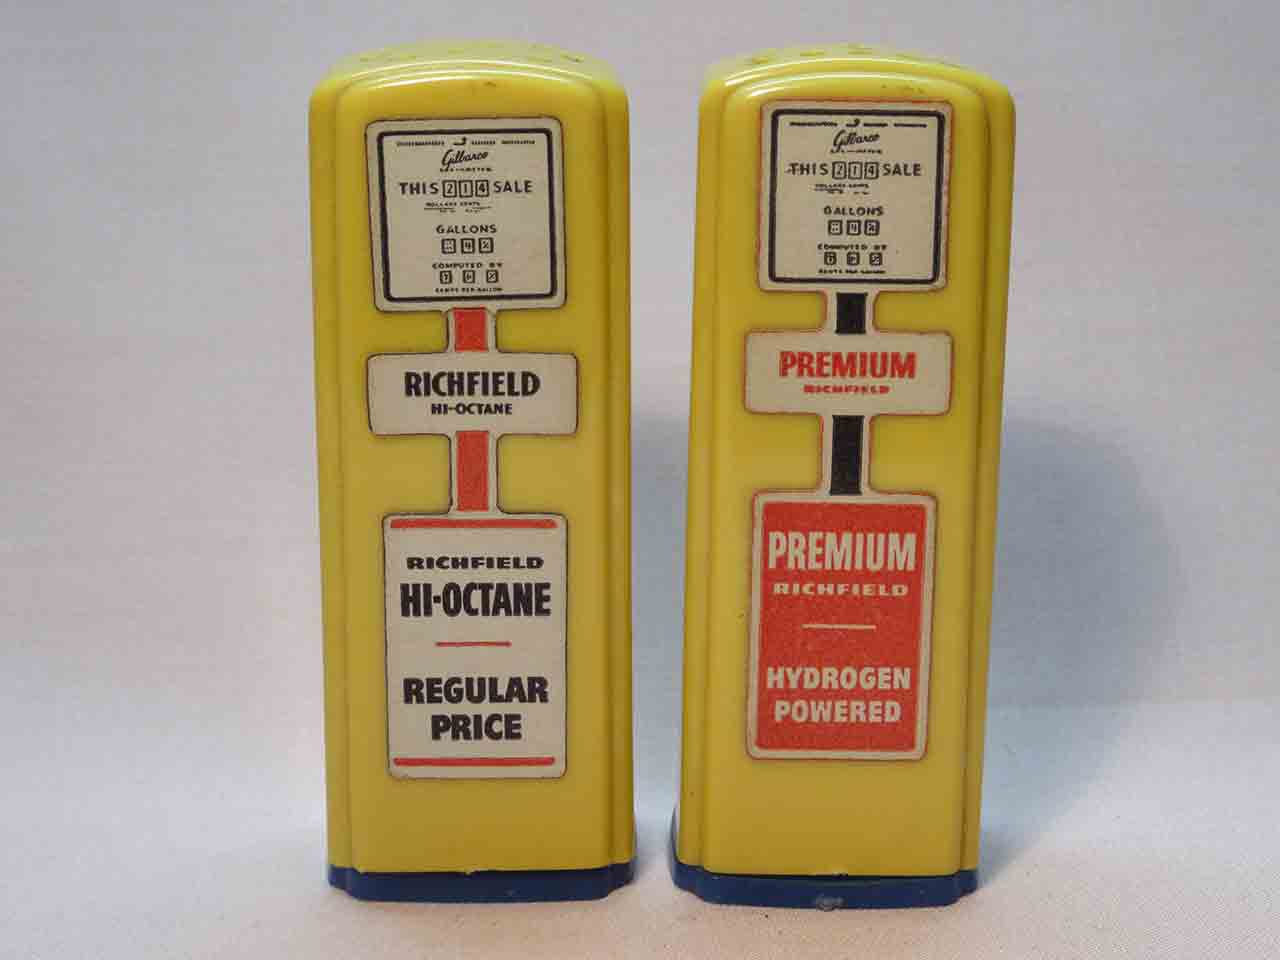 Plastic advertising gas pumps salt and pepper shakers - Richfield